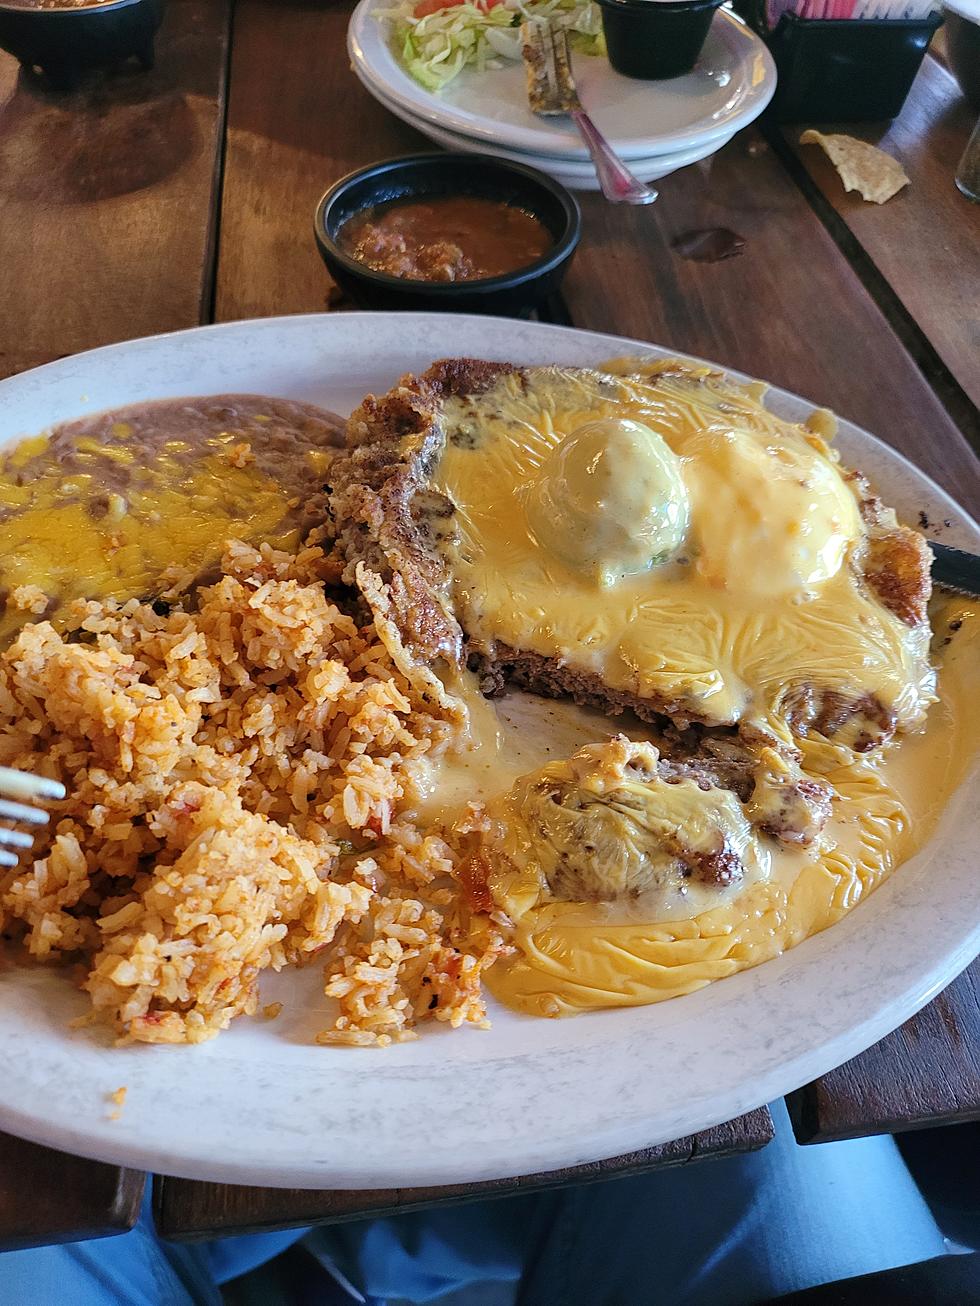 Did I Discover an Abomination of a Tex-Mex Meal in North Texas, or a New Cool Entree?